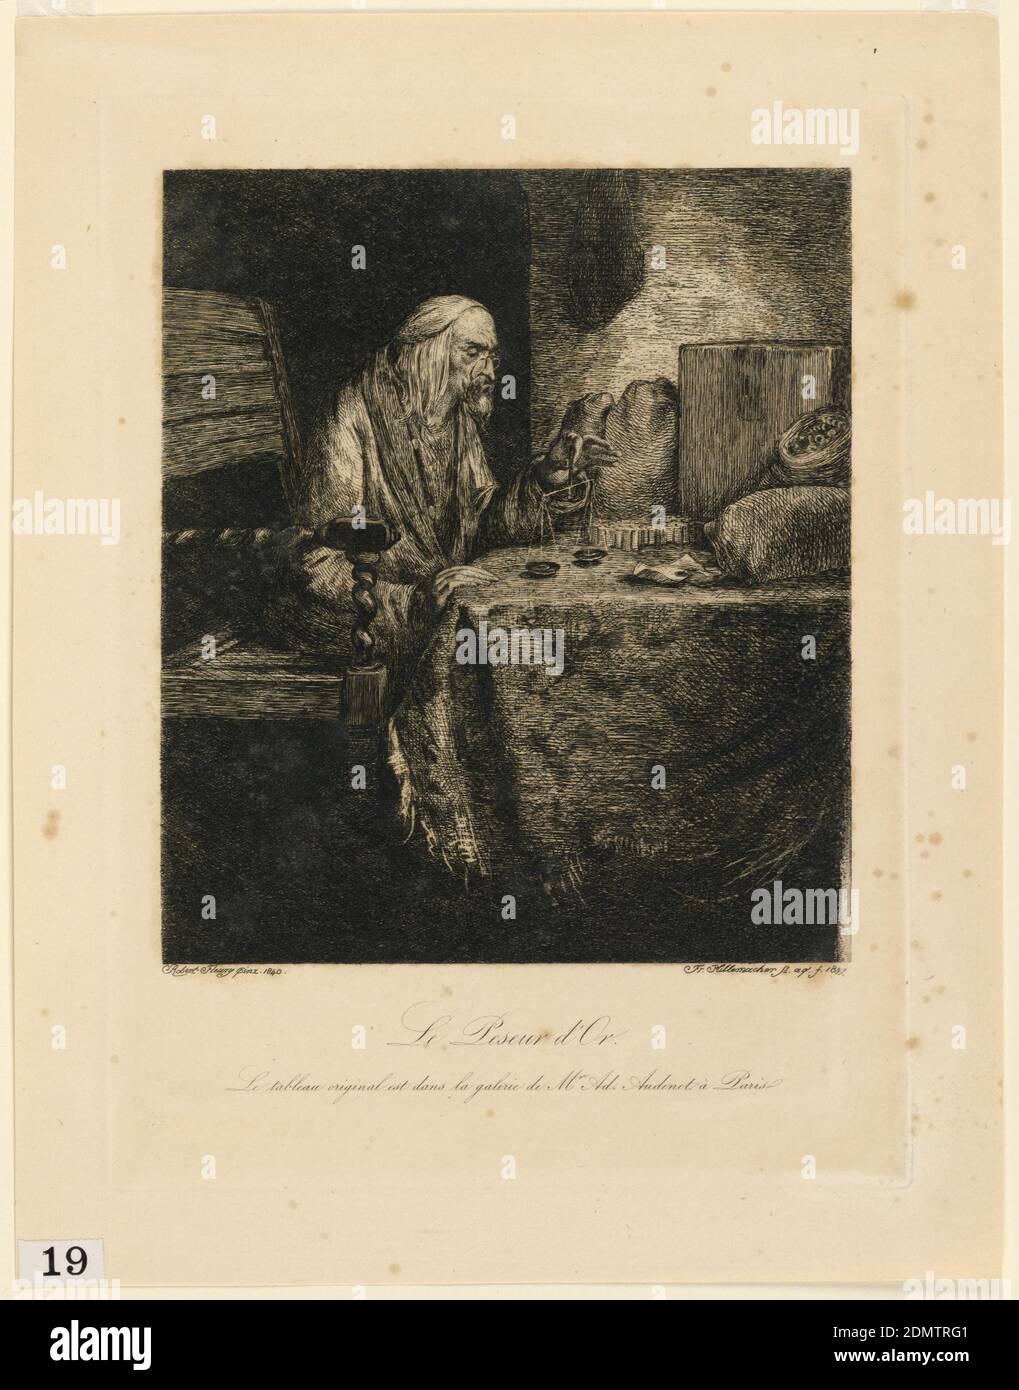 The Gold-Weigher, Frédéric-Désiré Hillemacher, French, 1811 - 1886, Joseph Nicolas Robert-Fleury, French, 1797 - 1890, Etching on tan paper, An old man sits in semi-gloom at a table, weighing gold., France, 1847, Print Stock Photo